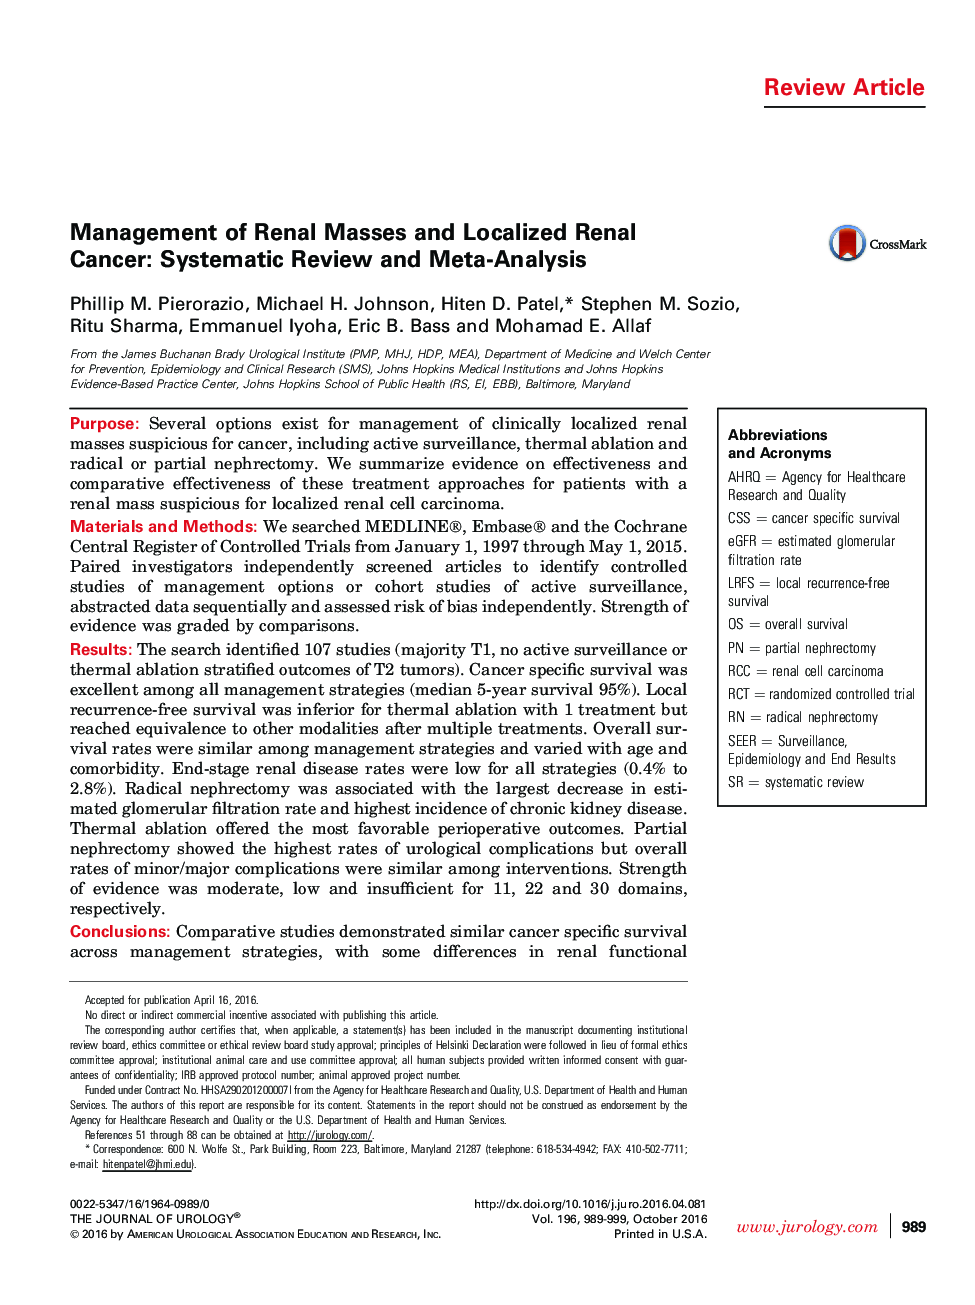 Management of Renal Masses and Localized Renal Cancer: Systematic Review and Meta-Analysis 